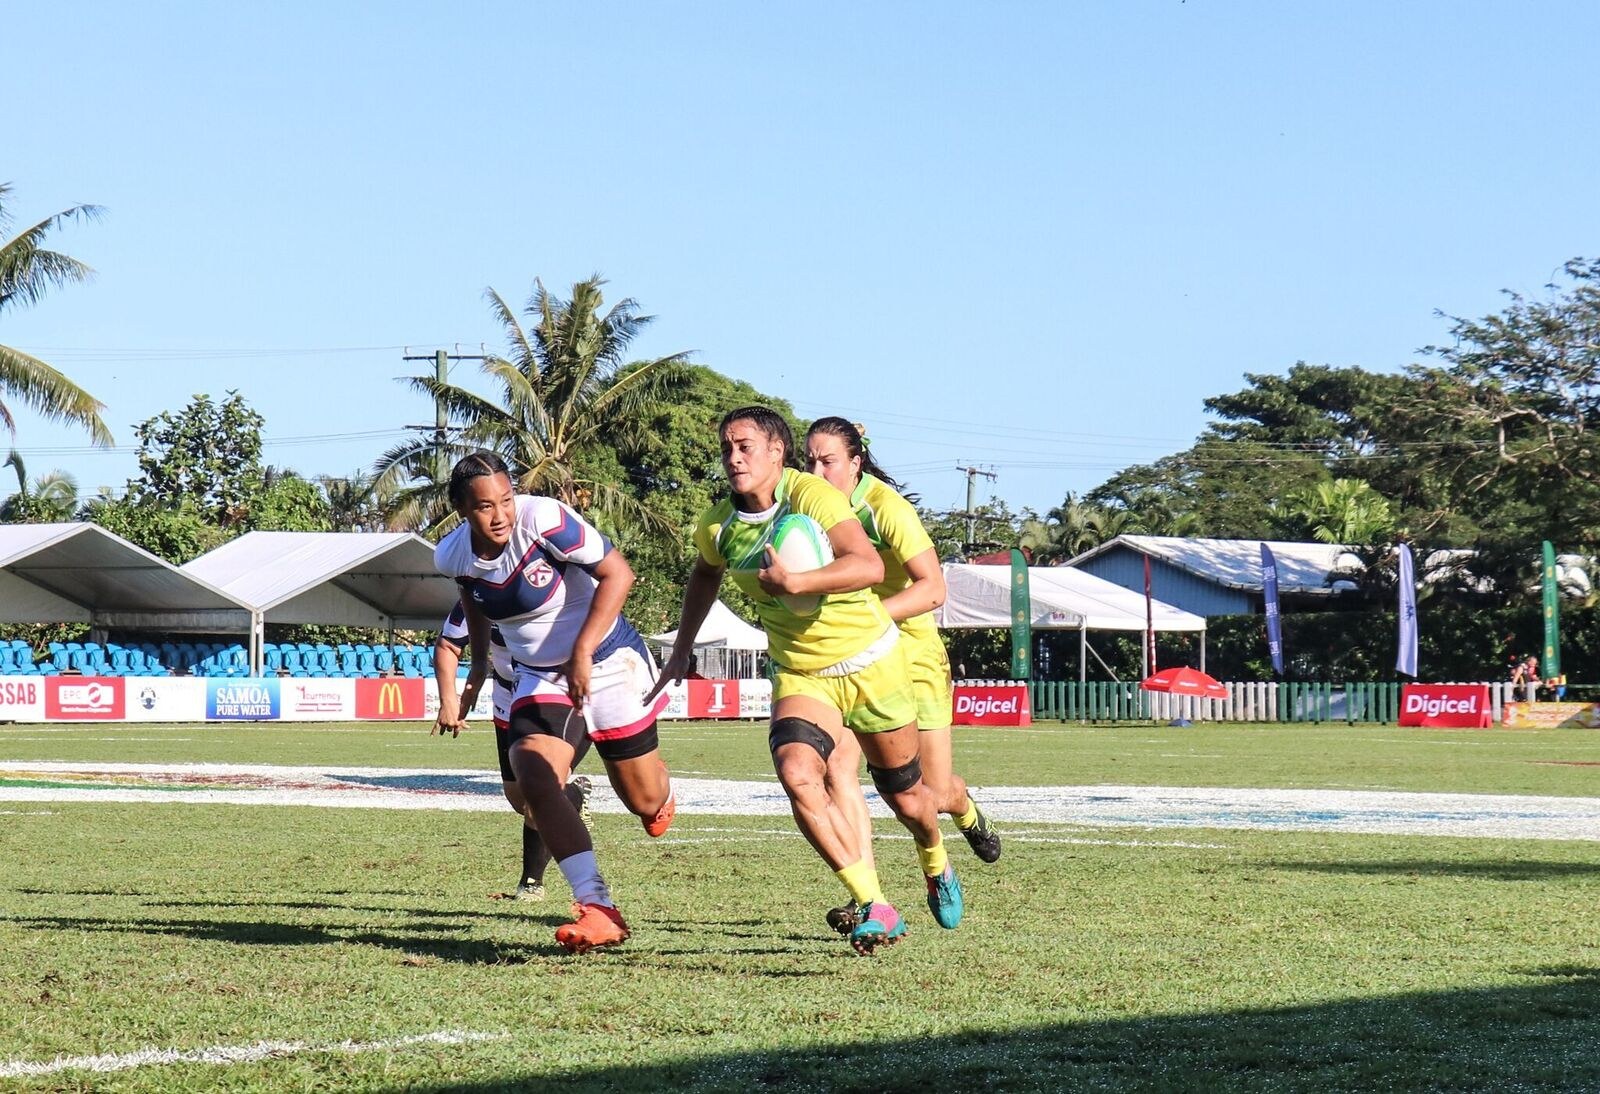 Australia's shared sporting links with Pacific nations are viewed as an advantage ©Oceania Rugby